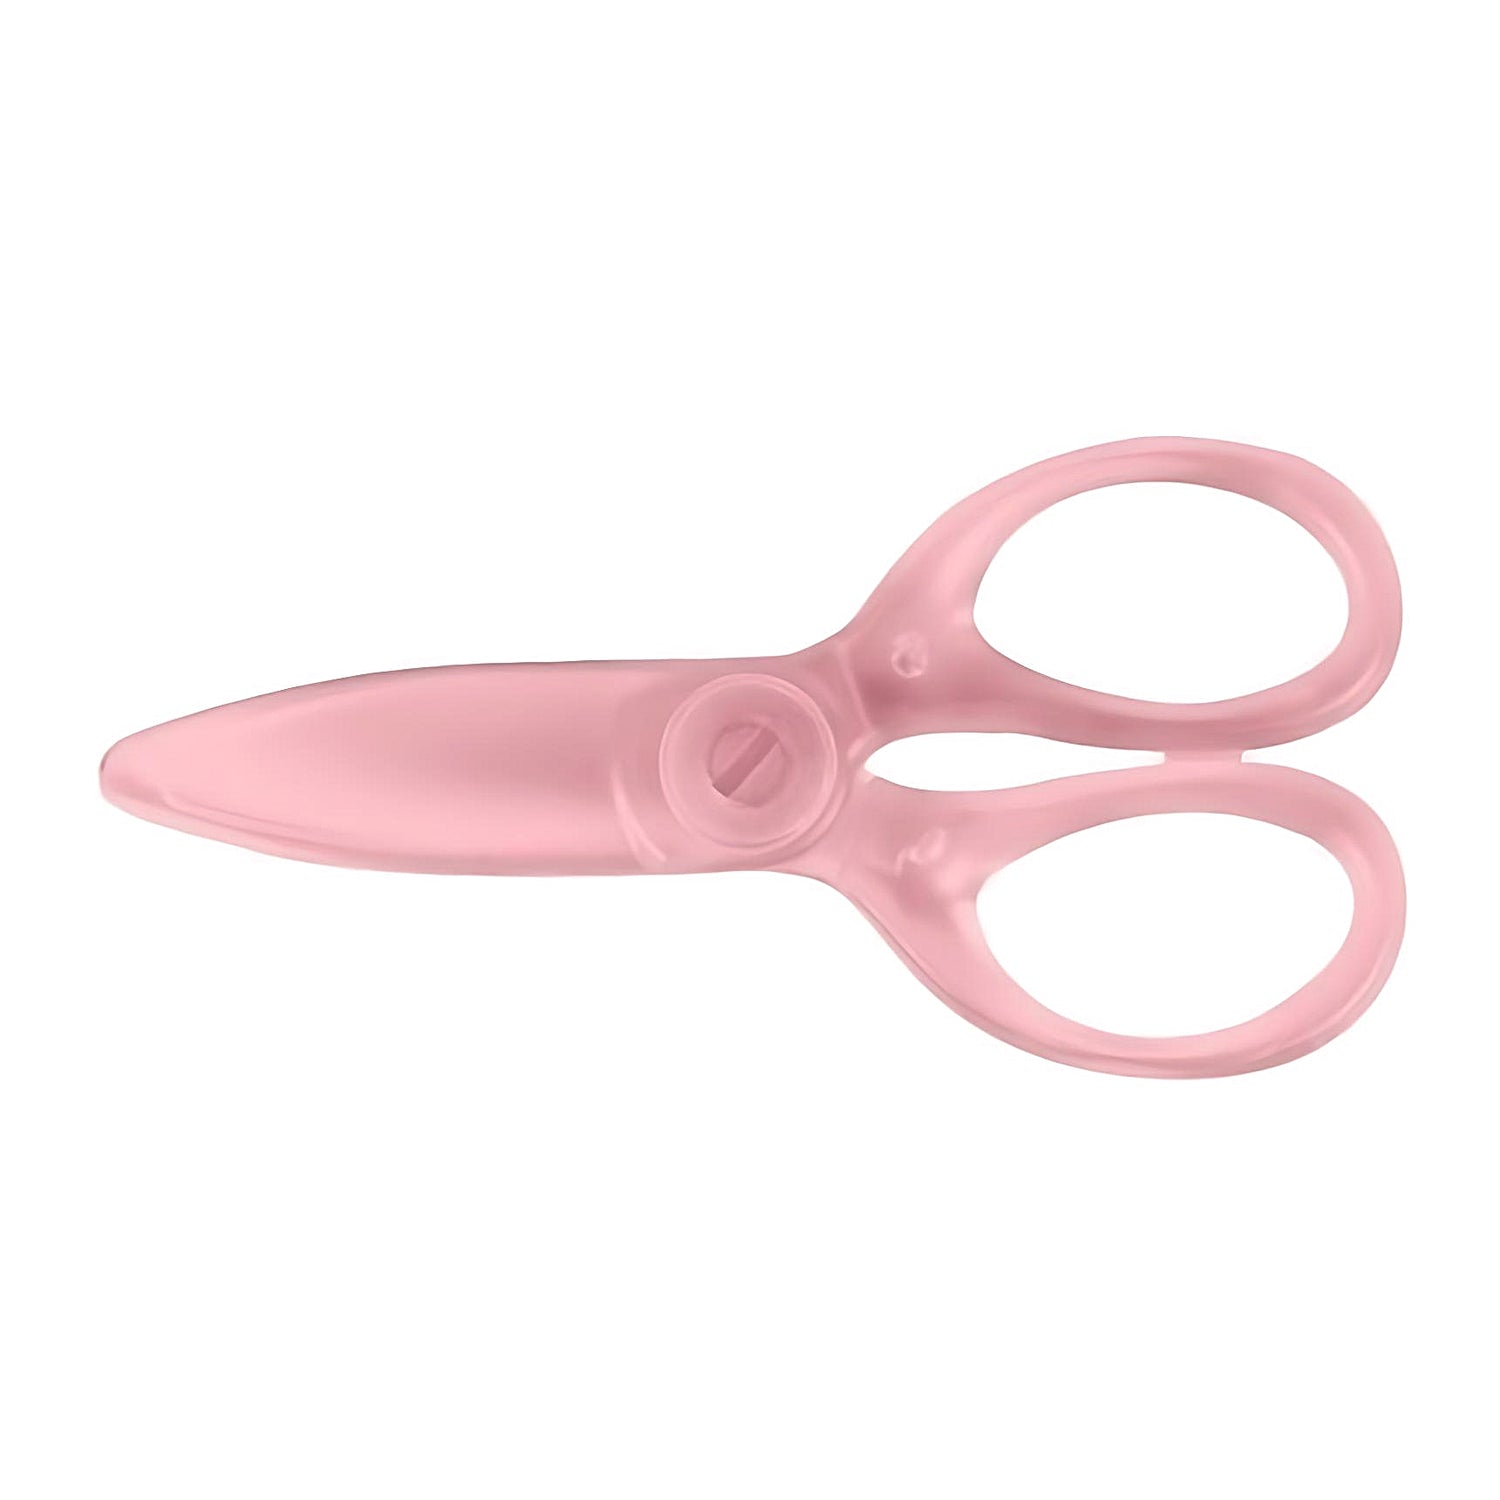 Kokuyo plastic scissors in pink color on a white background